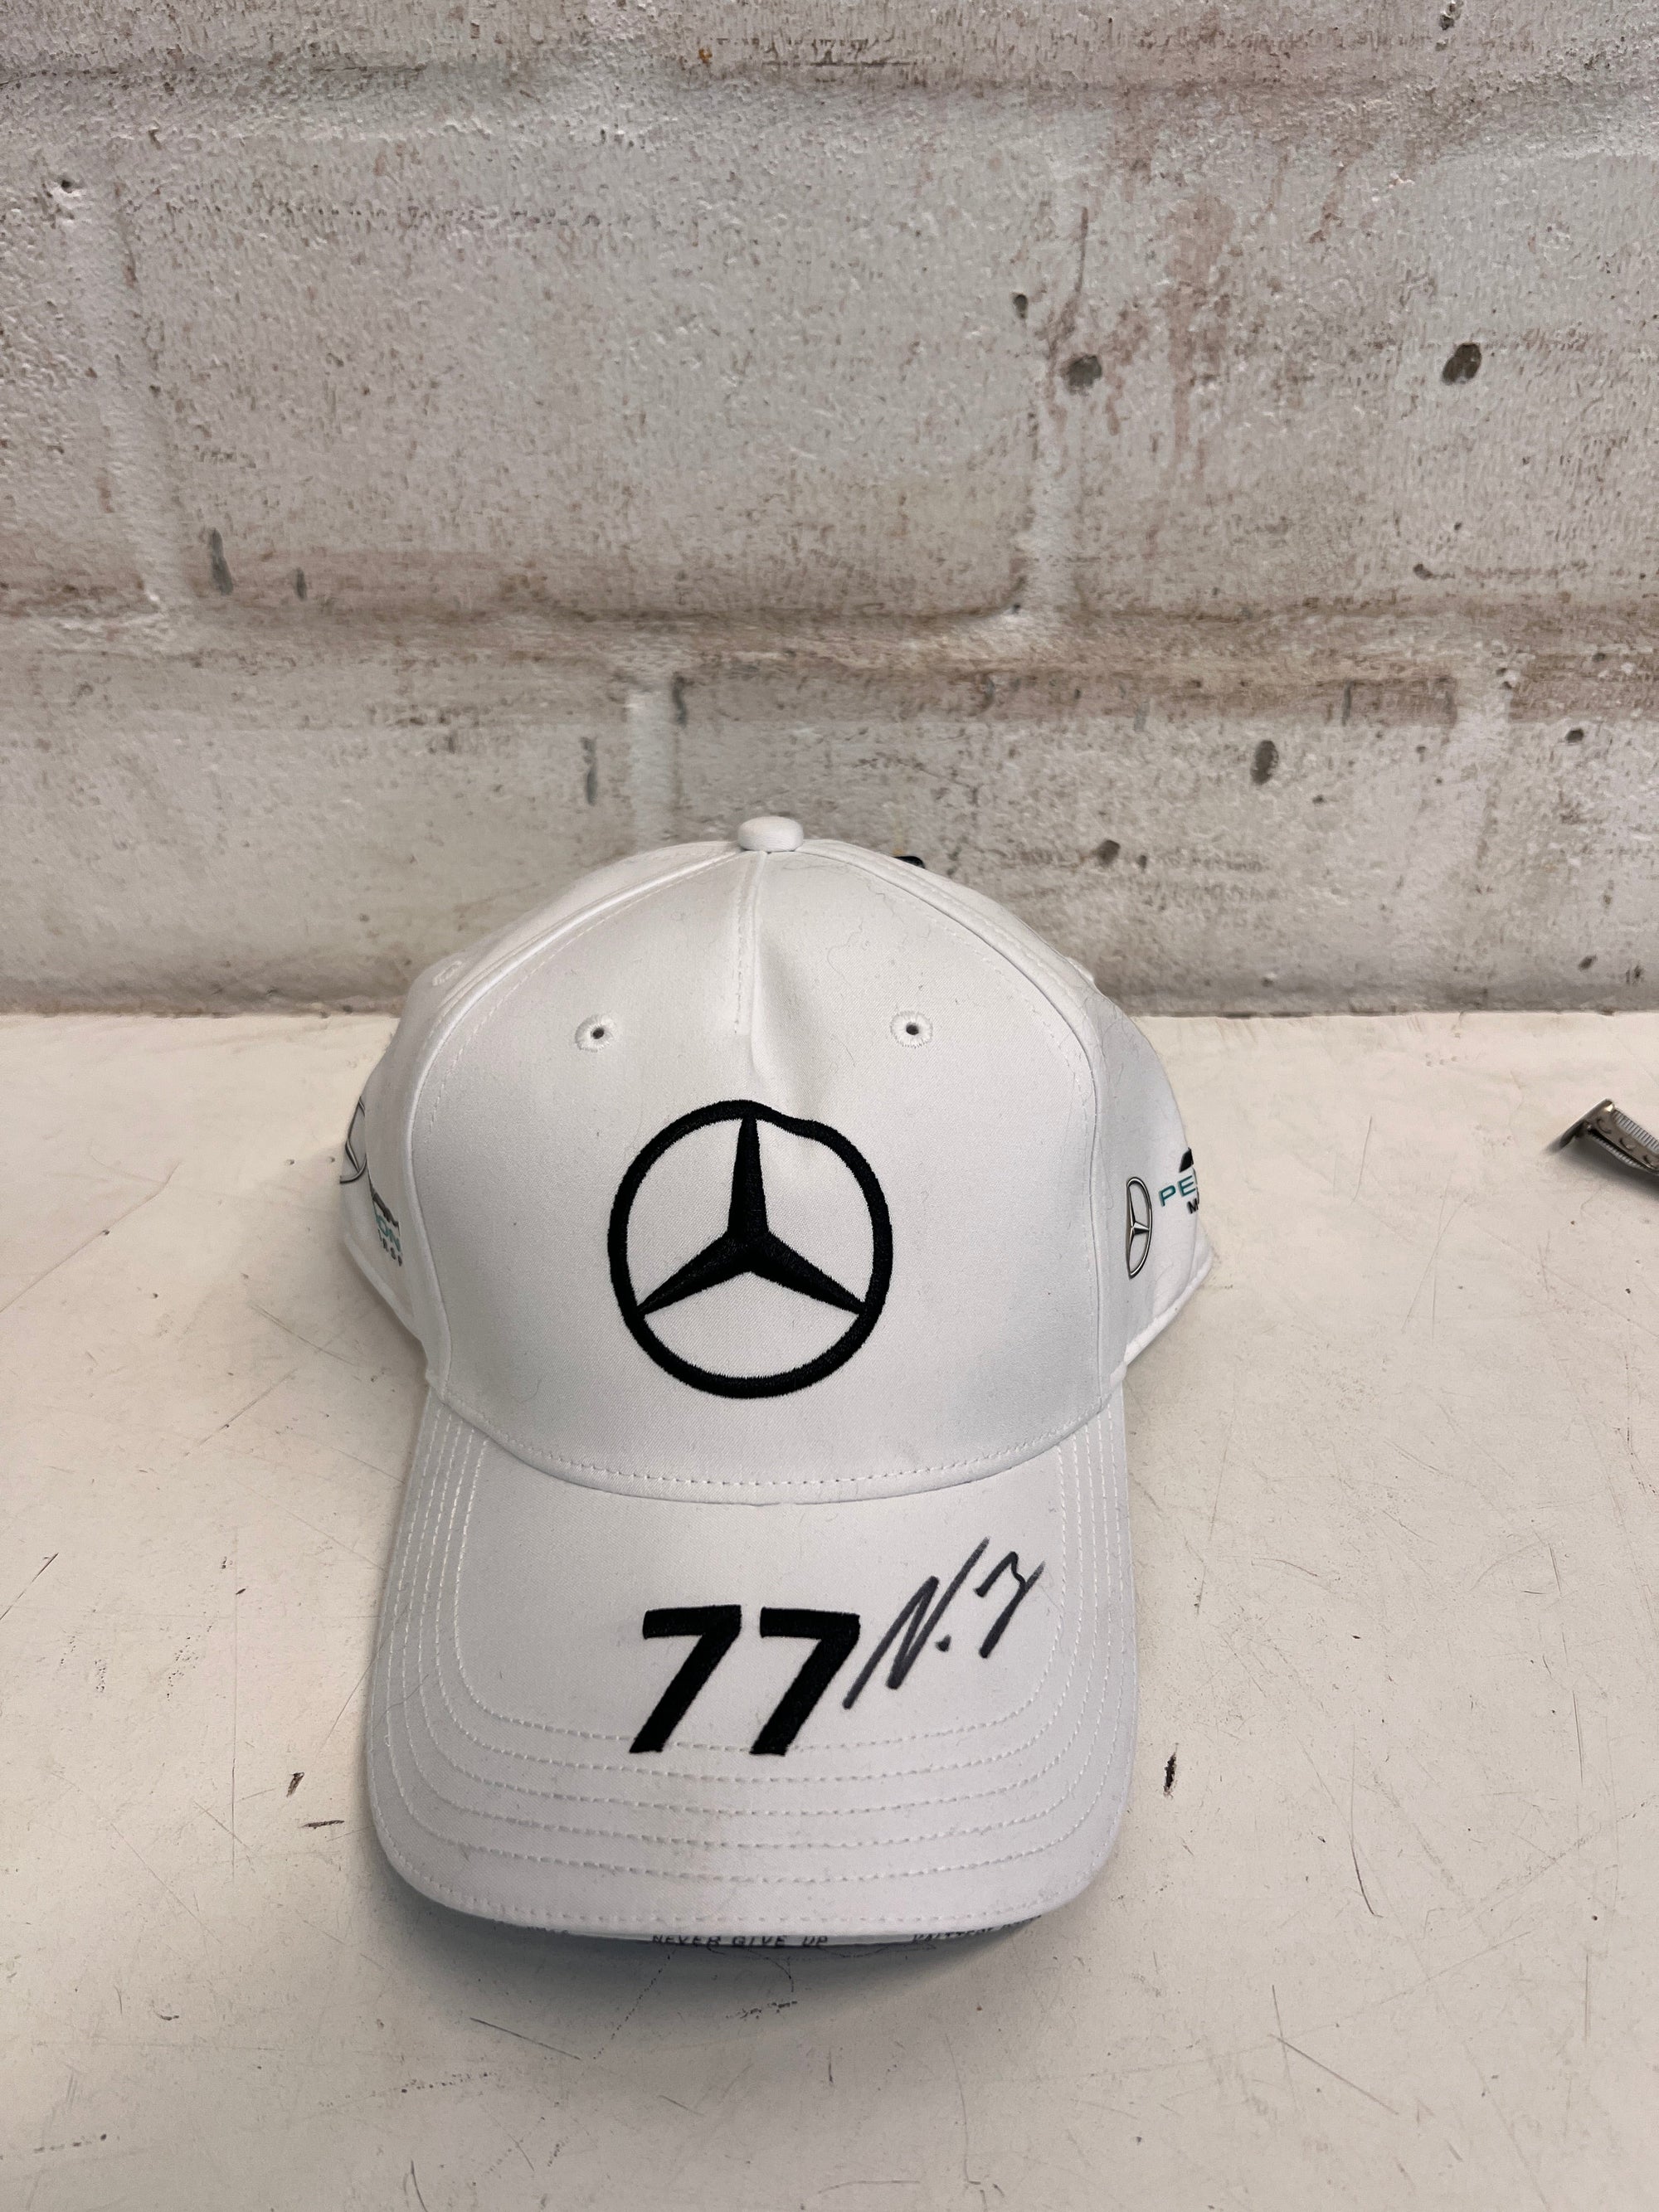 White Mercedes AMG F1 Cap - Signed by VB_01